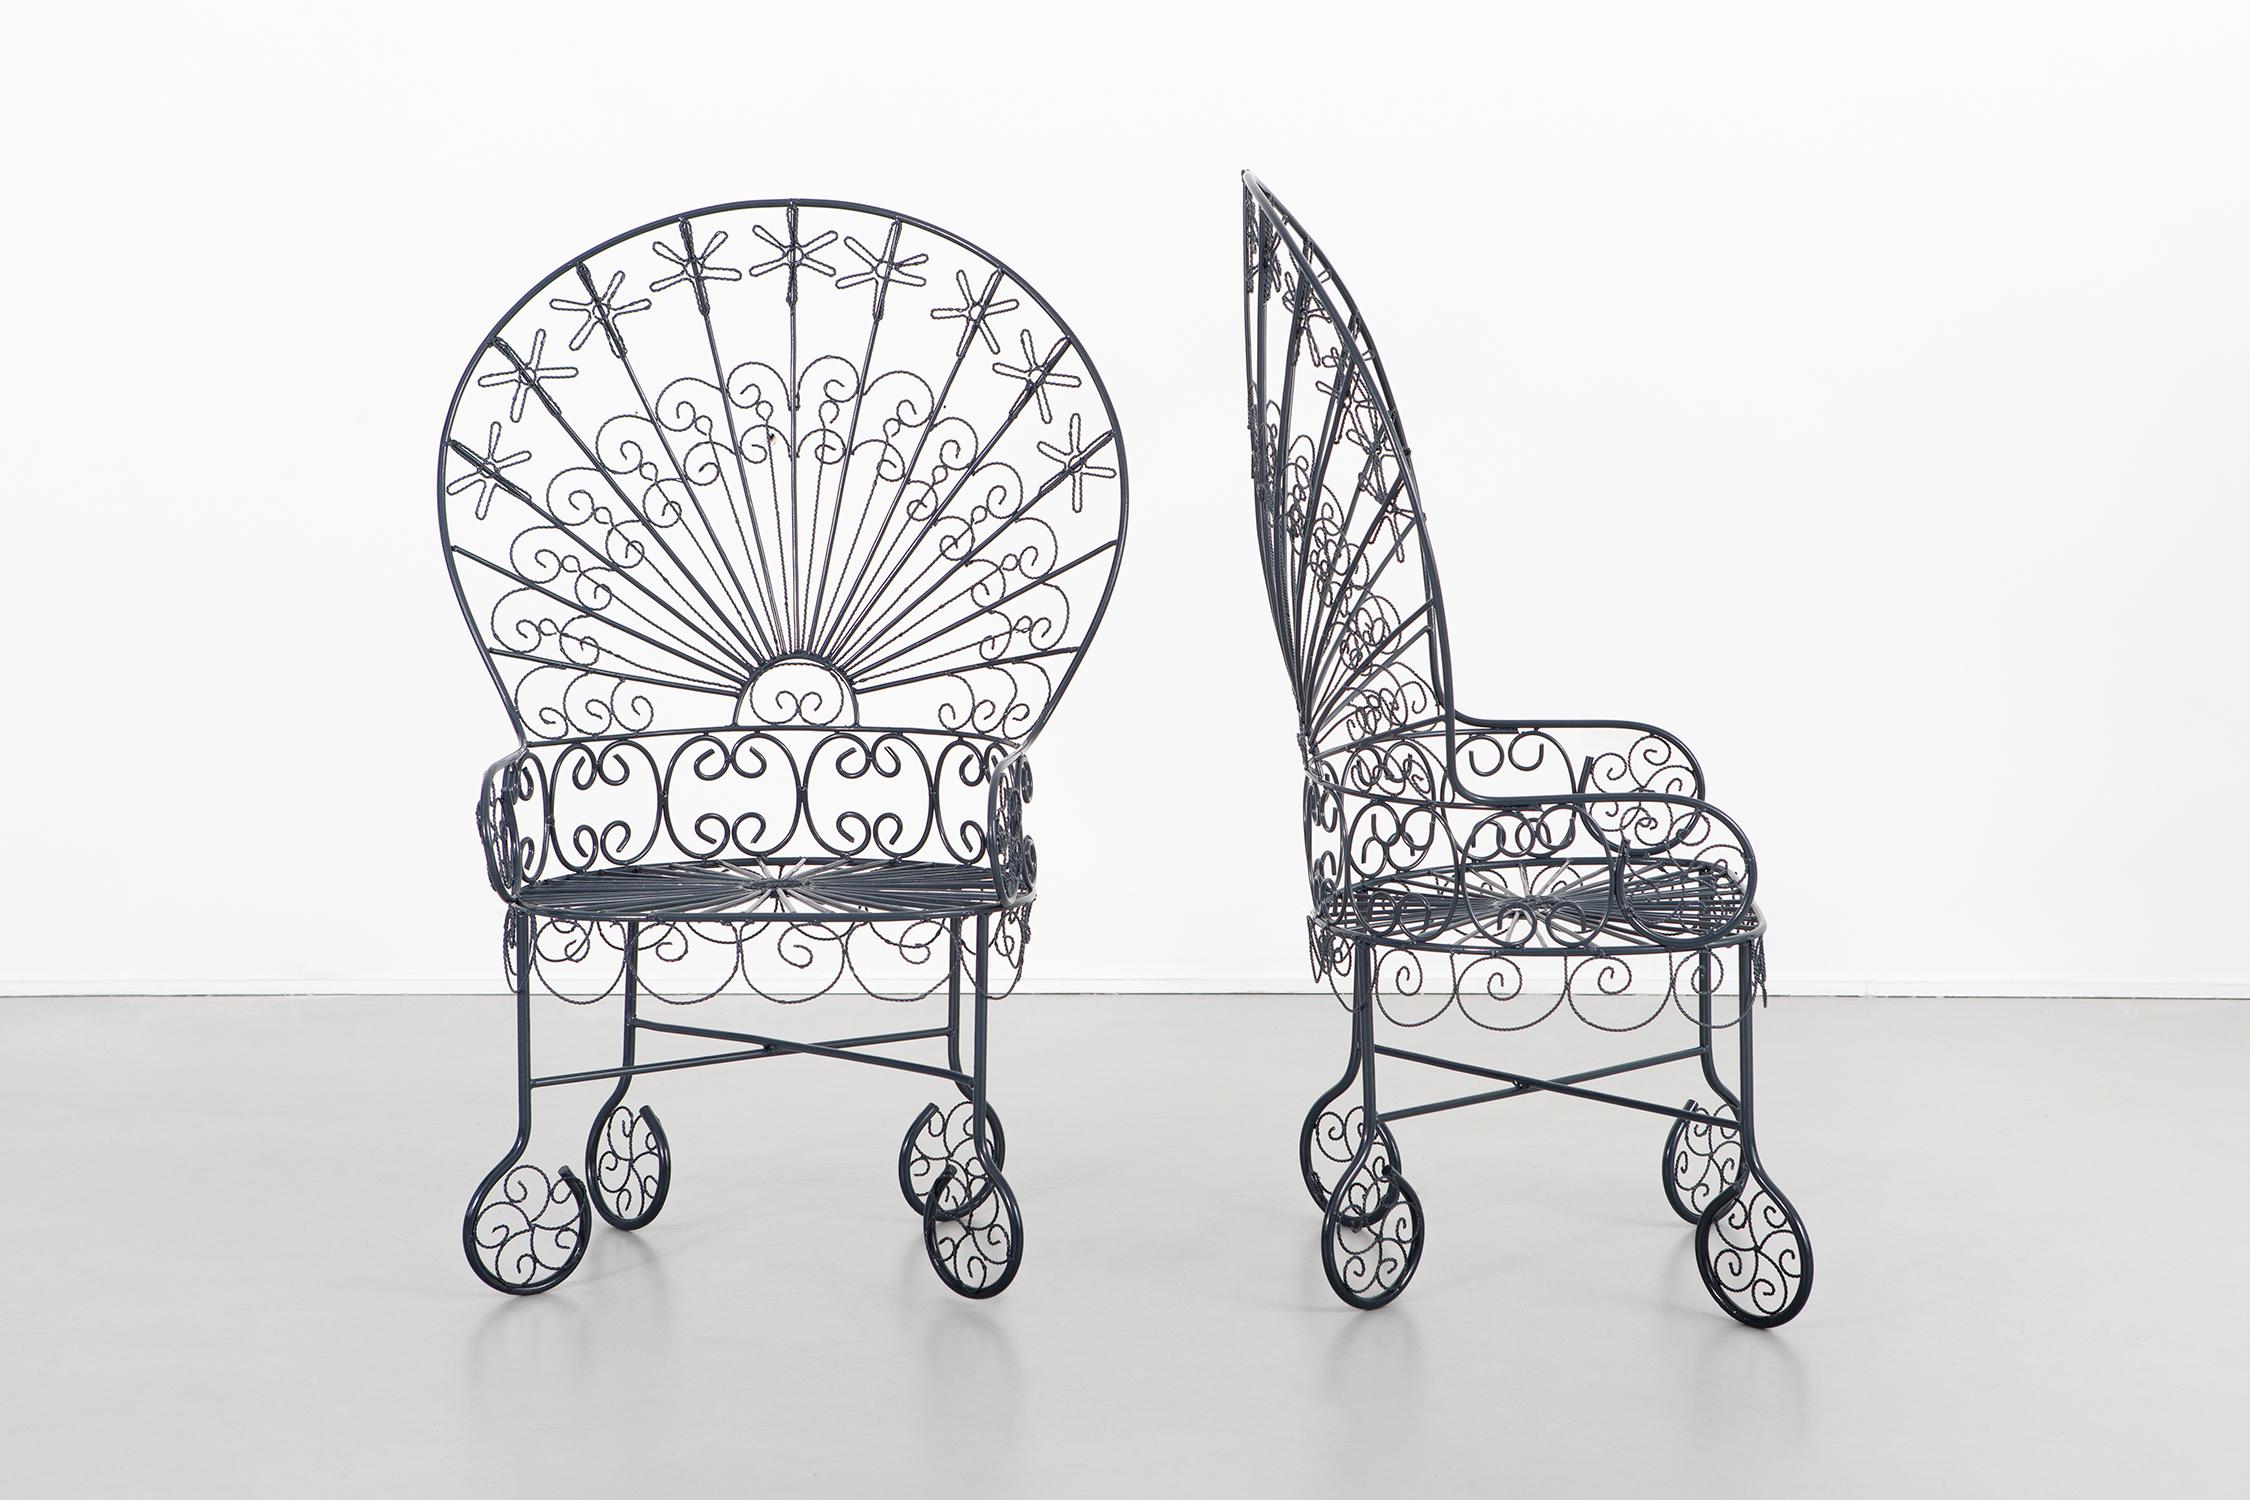 Set of two Peacock chairs.

Designed by John Salterini.

USA, circa 1930s.

Wrought iron.

Freshly powder coated. 

Measures: 43” H x 28 ¾” W x 21 ?” D x seat 16” H.

Color sample of powder coating available upon request.